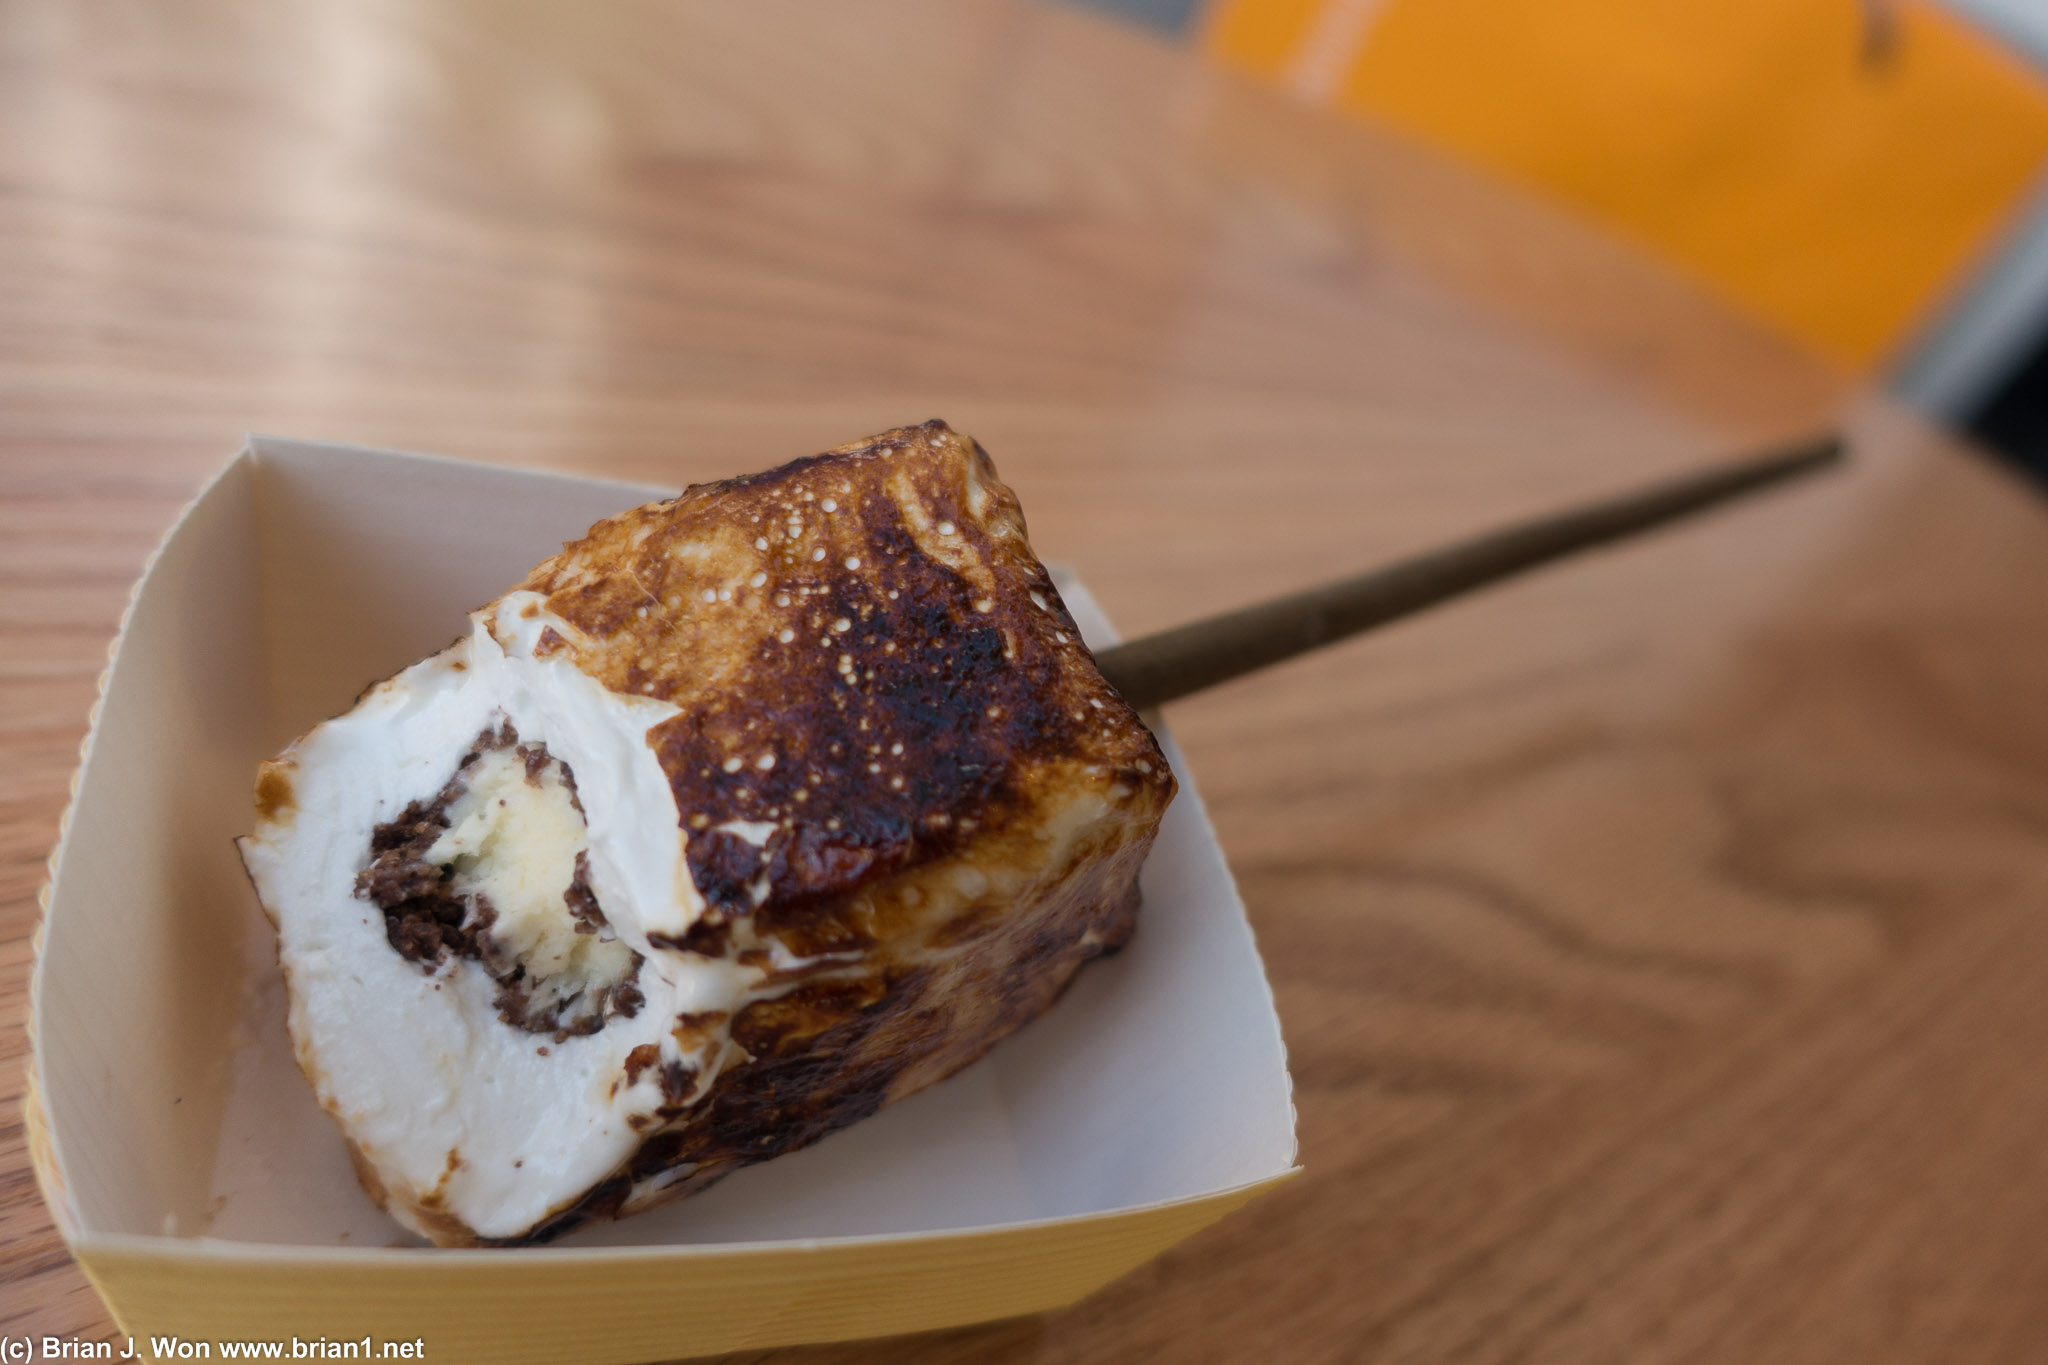 Ice cream s'mores. How had I not heard of this before?!?!